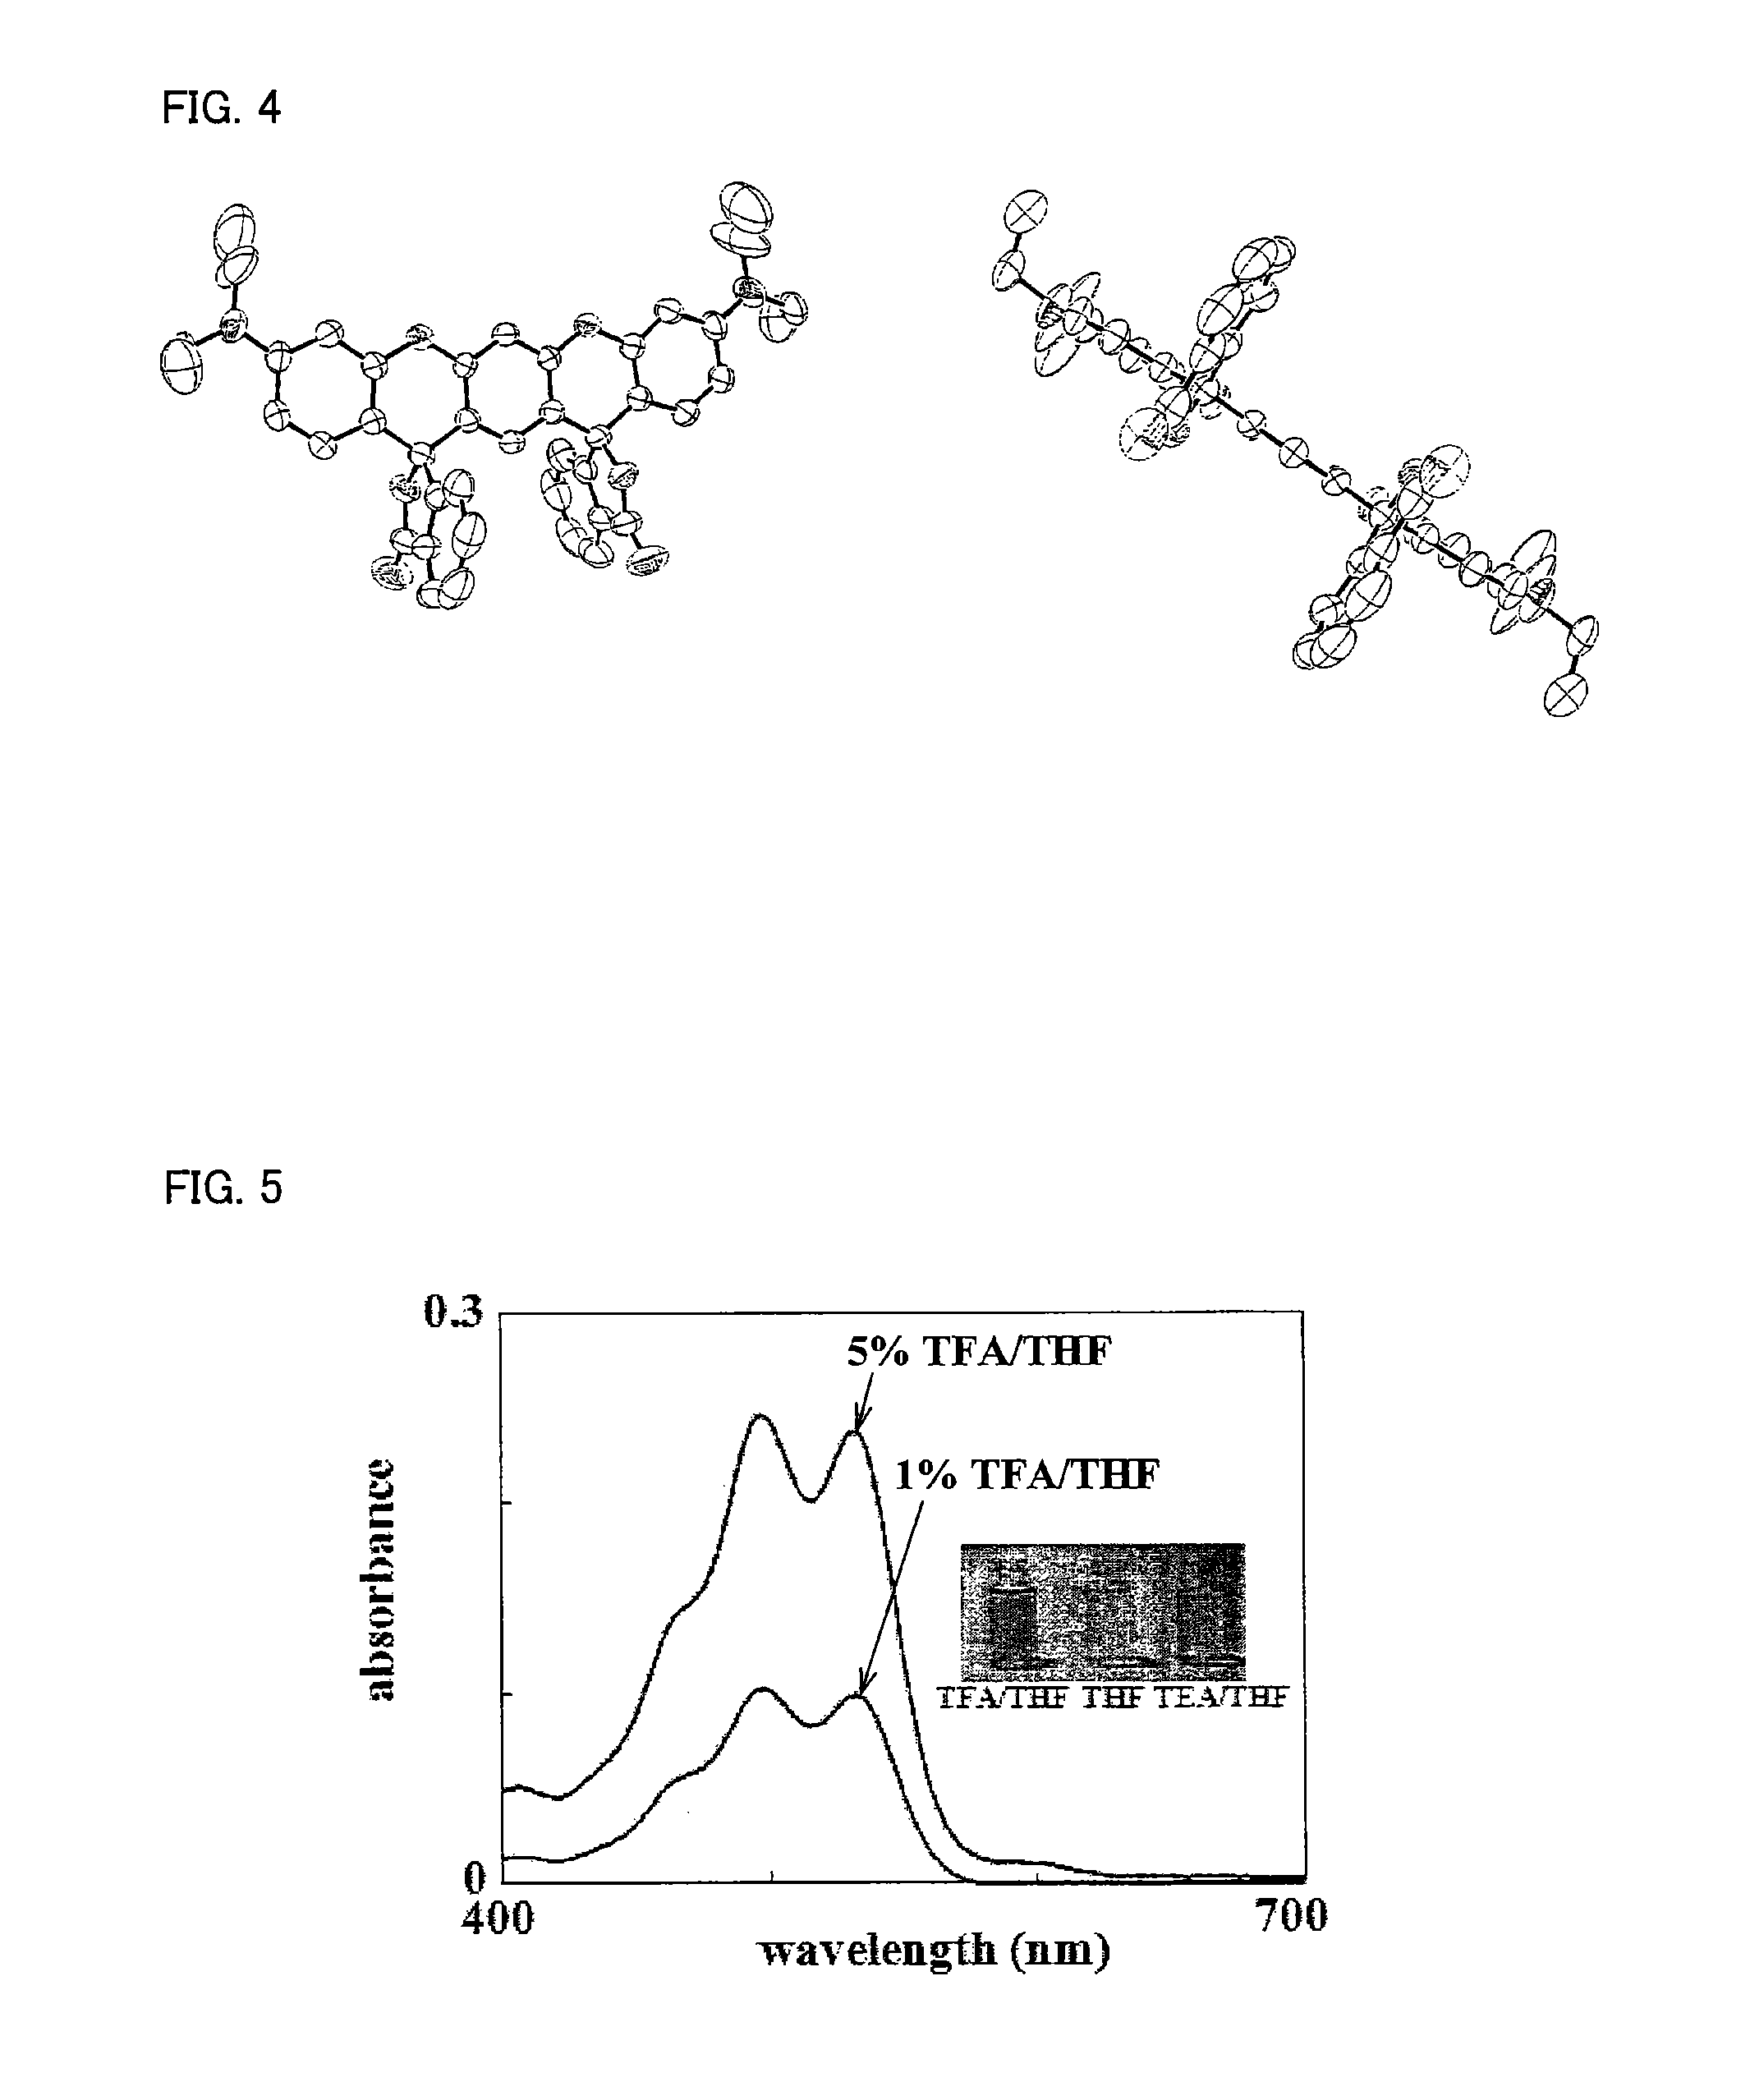 Compound and use thereof